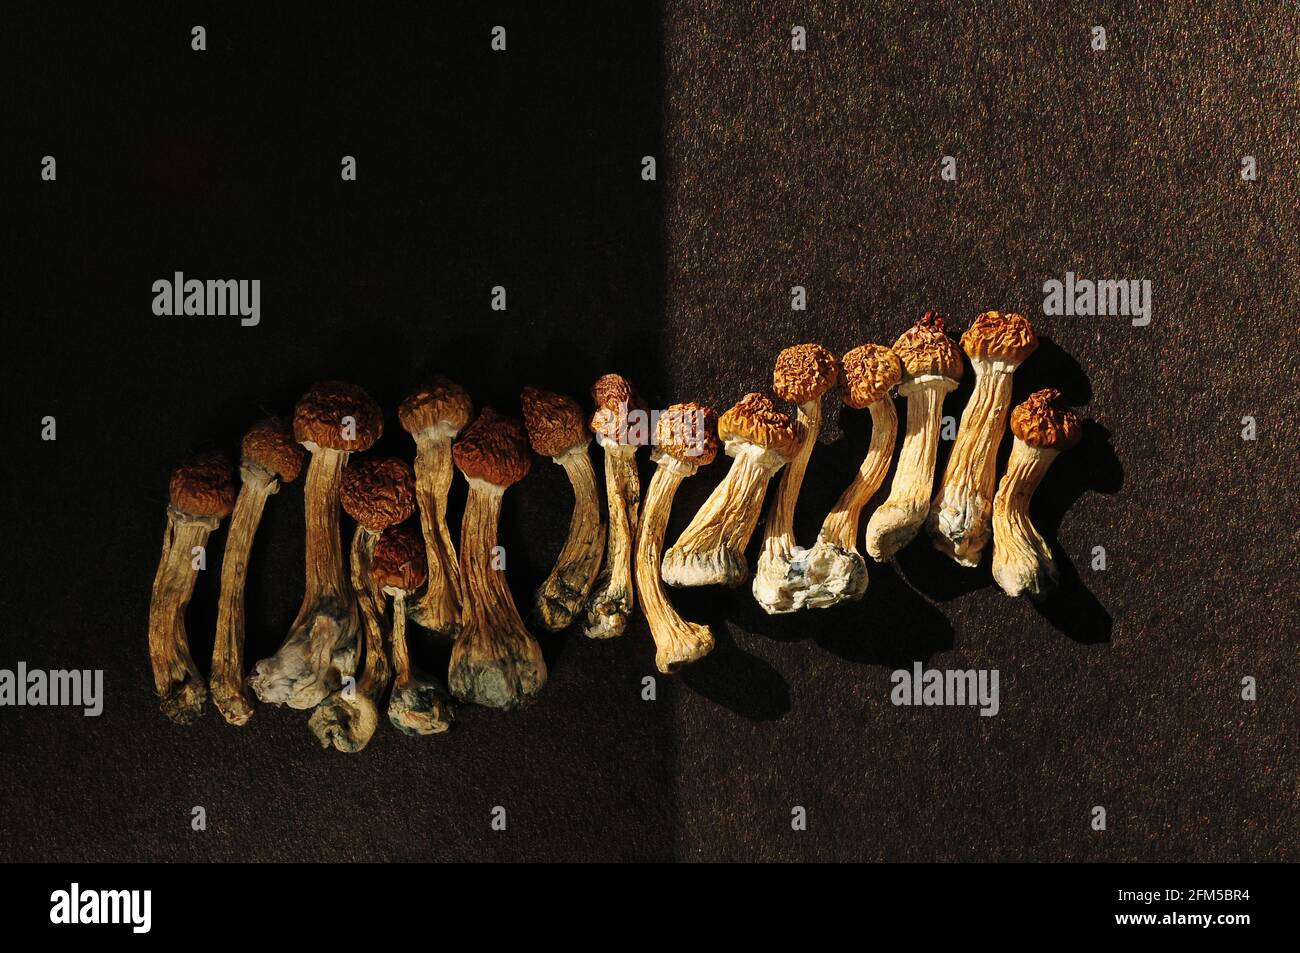 Dried psilocybe cubensis on black backfround, flat lay. Psilocybin mushrooms, come in from the cold. Magic shrooms Golden Teacher Stock Photo